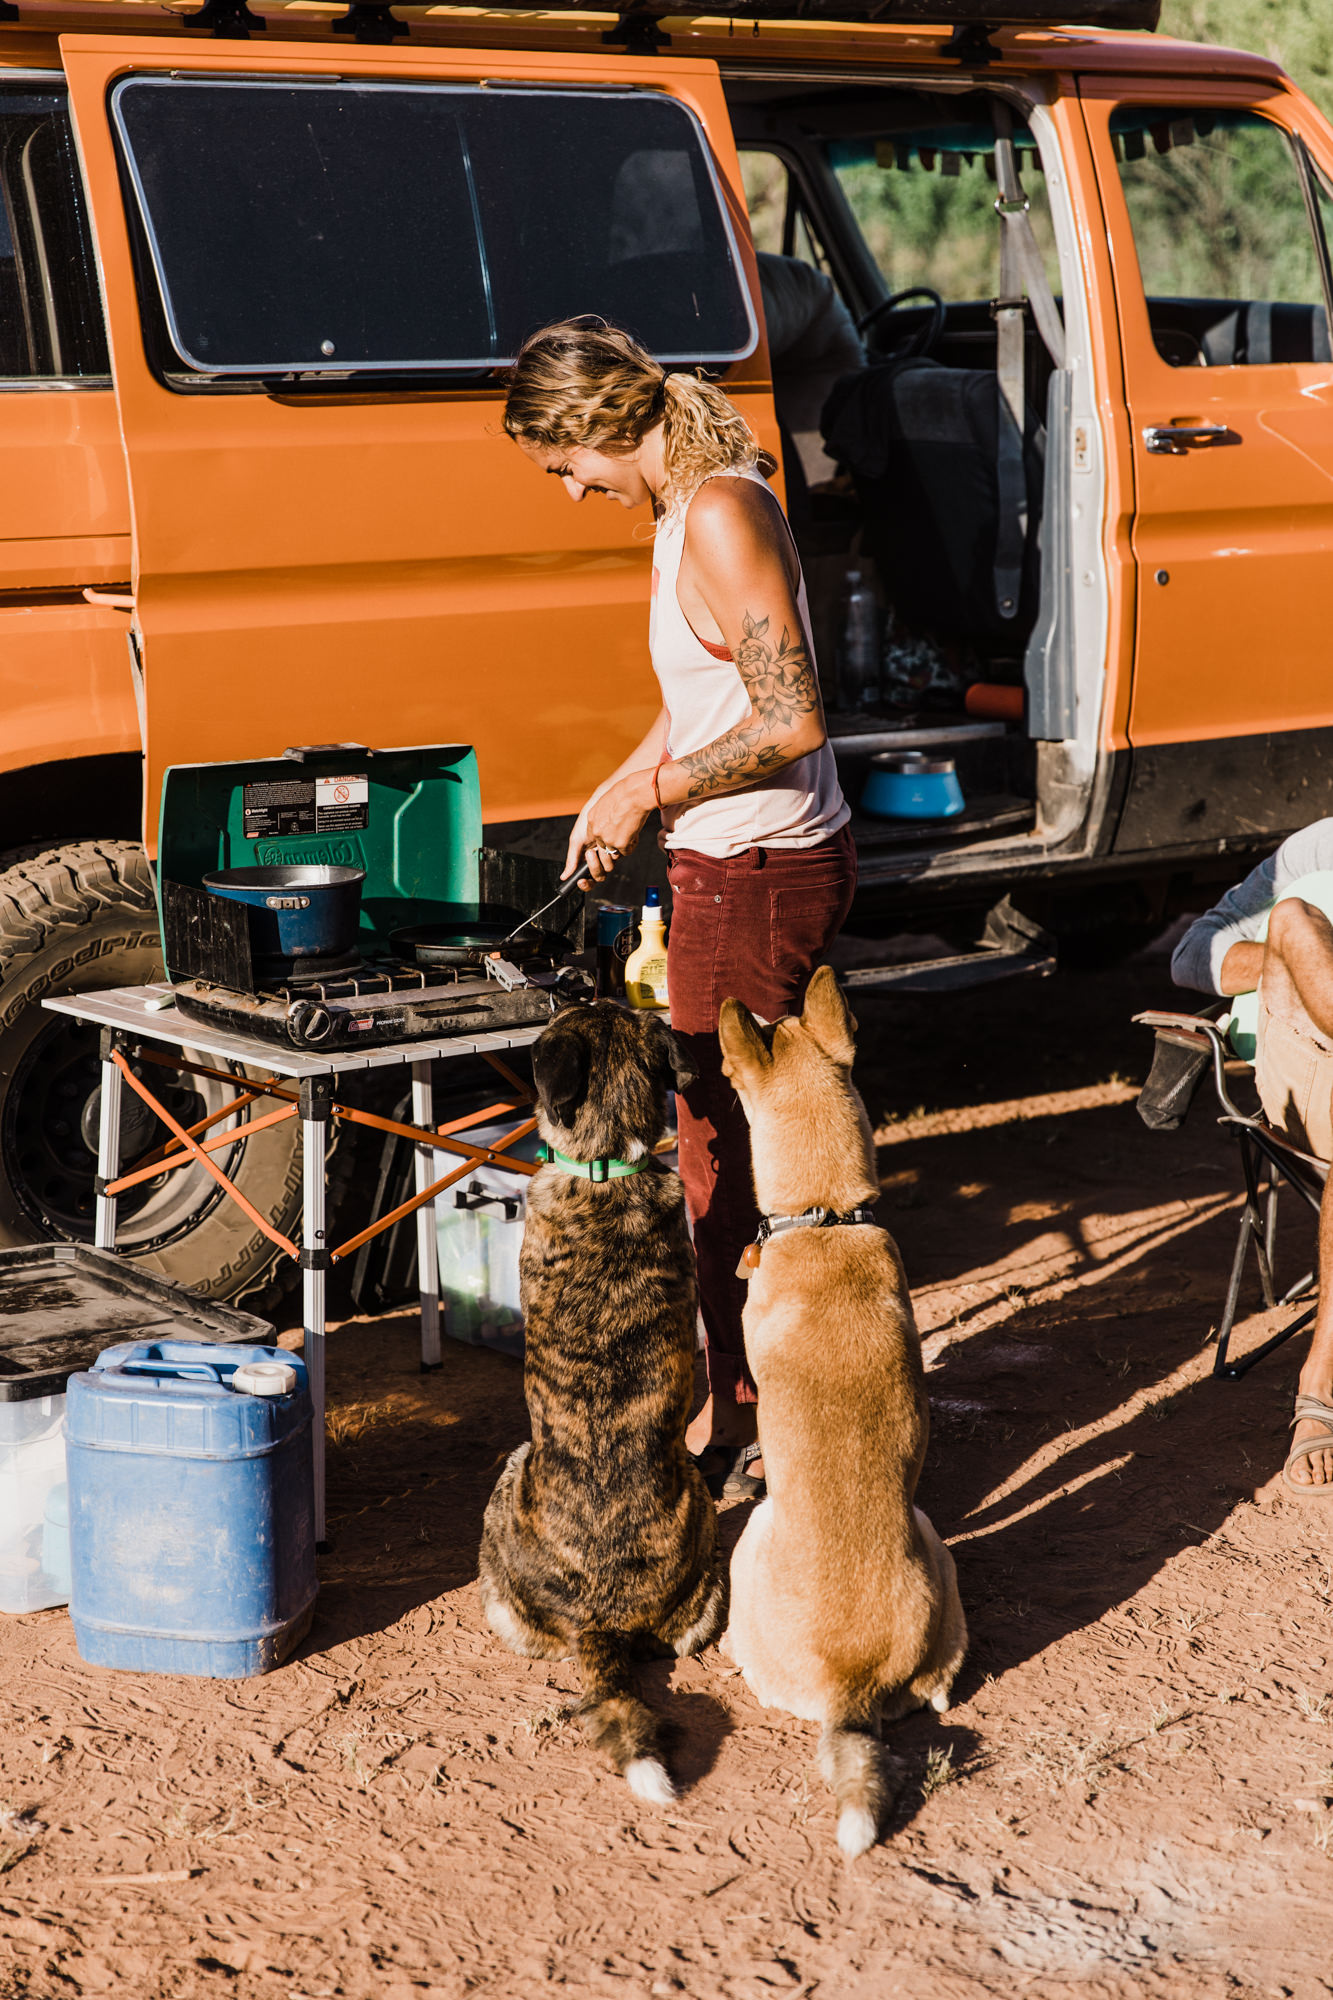 bri + keith madia | van life in the utah desert | never leave the dogs behind | the hearnes adventure photography for ruffwear | www.thehearnes.com